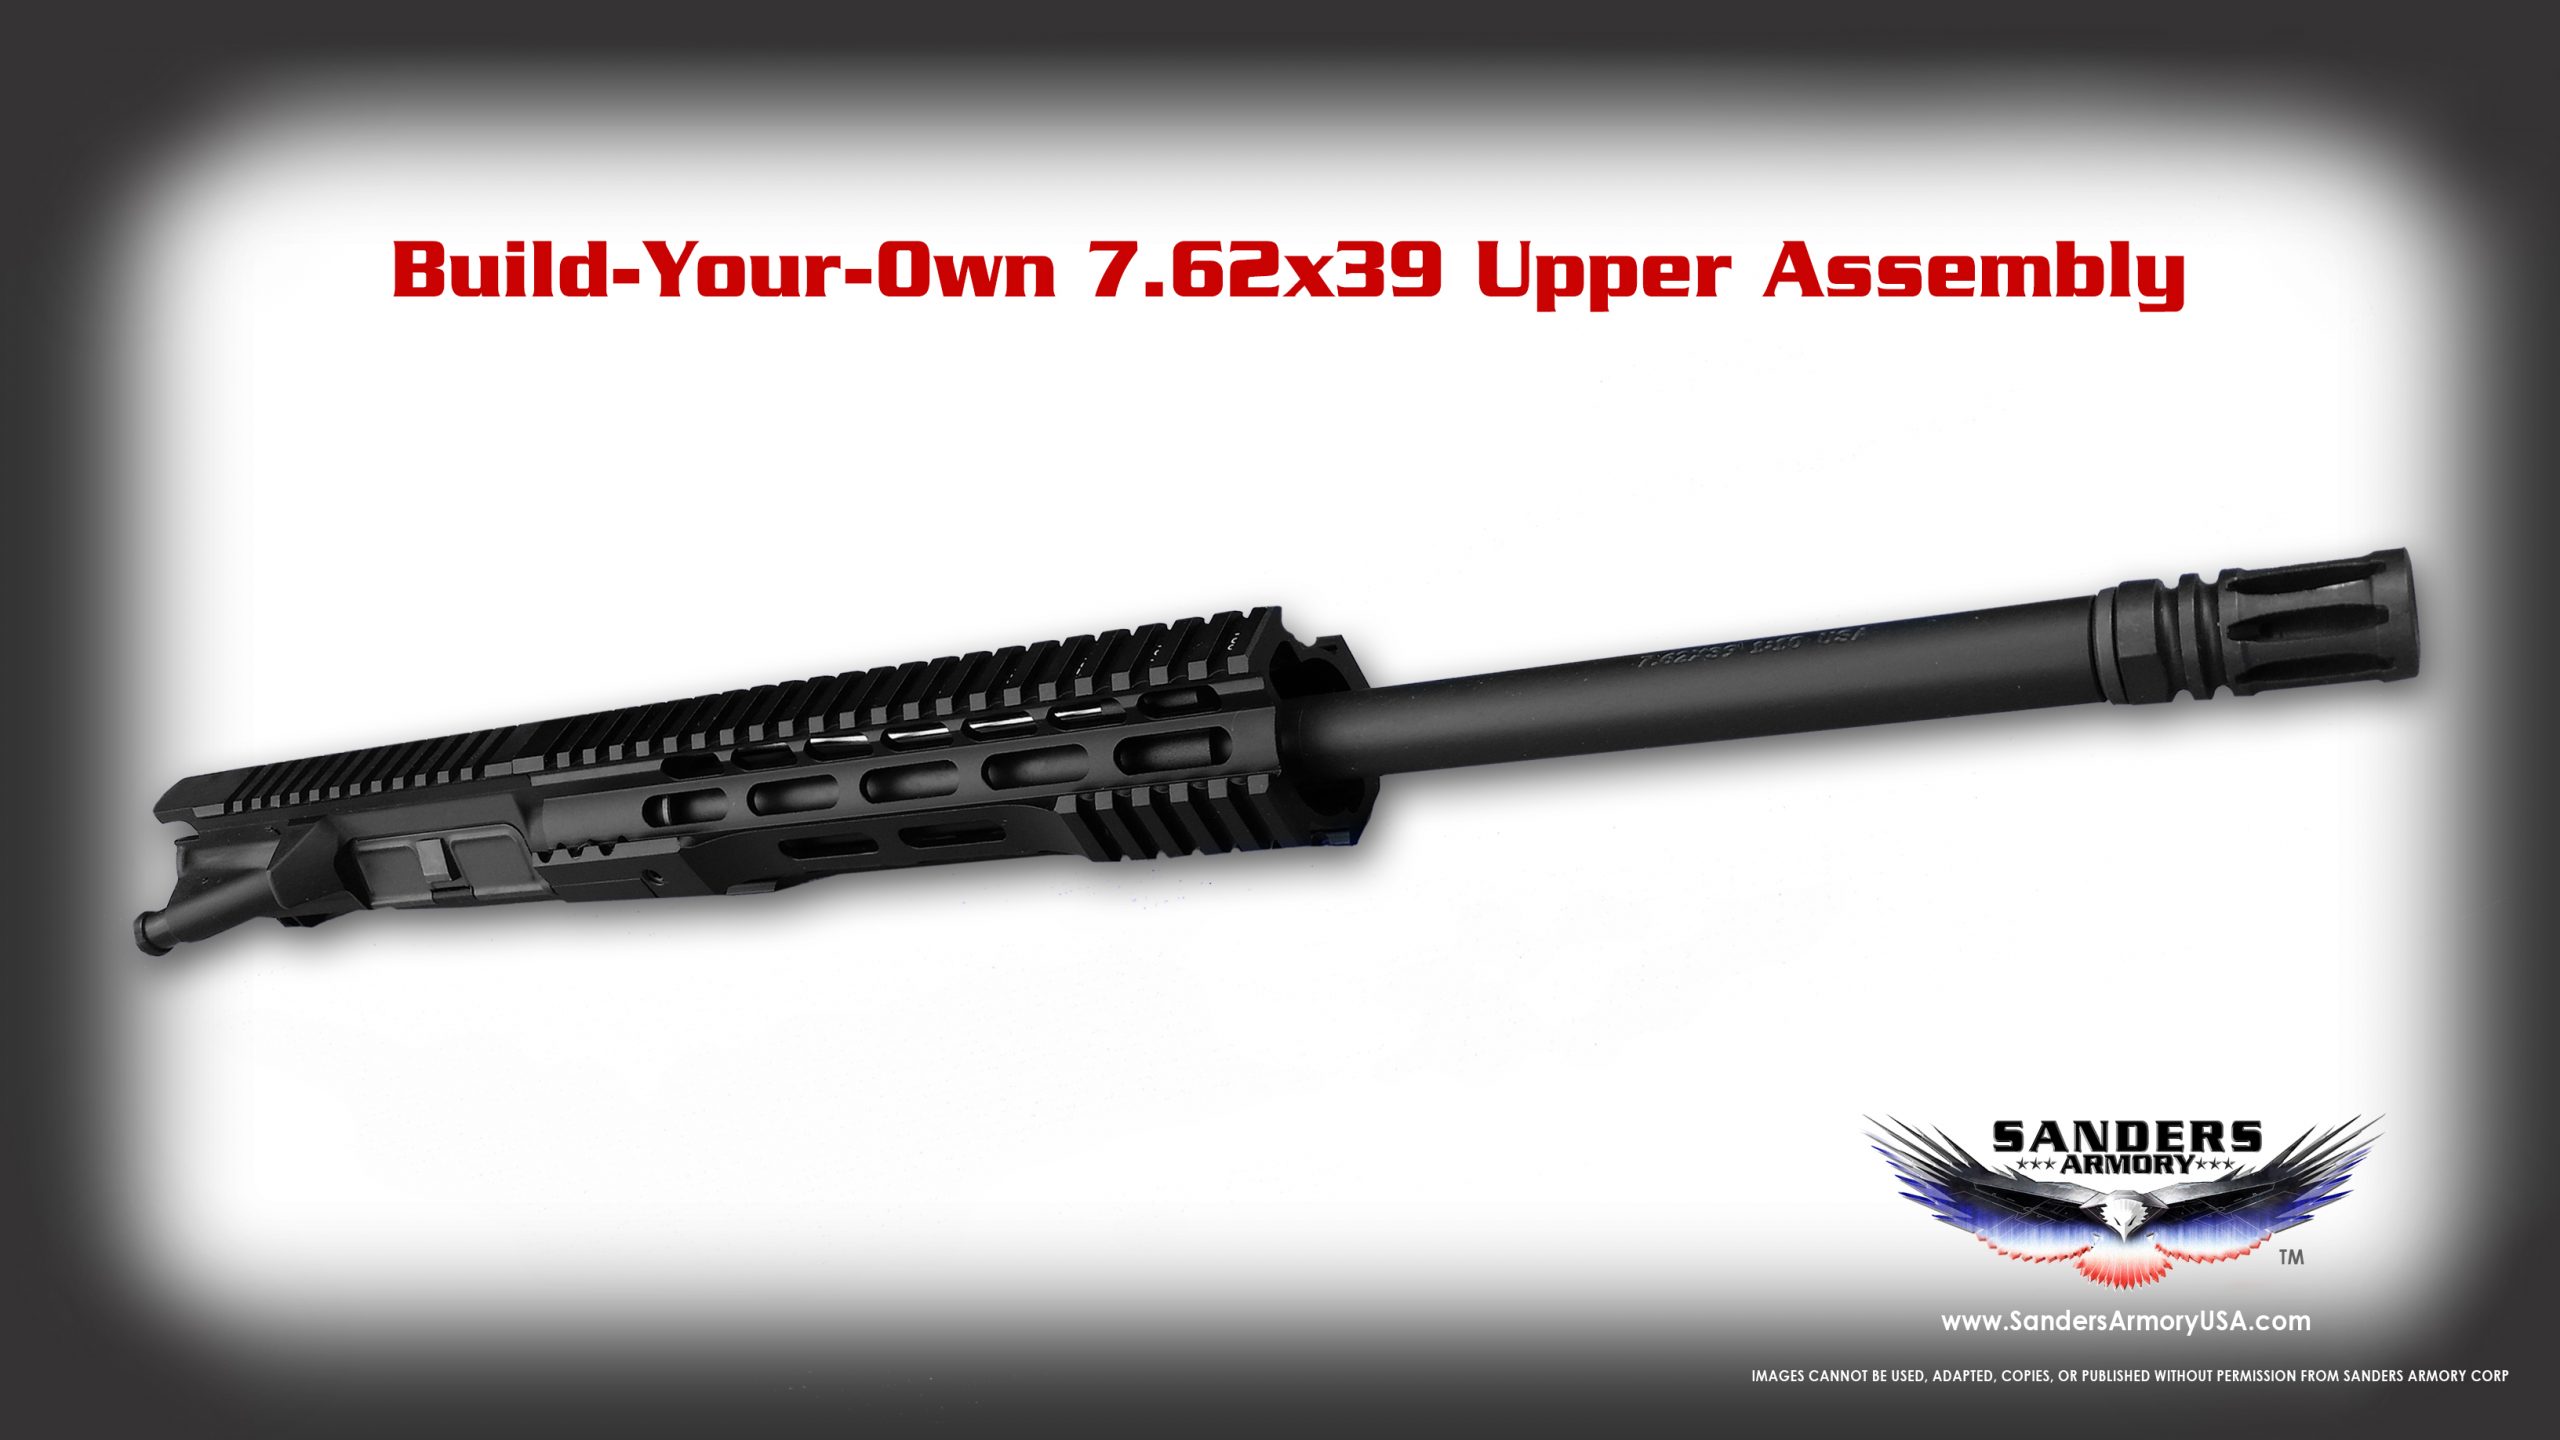 Sanders Armory Build Your Own AR-47 7.62x39 Upper Assembly